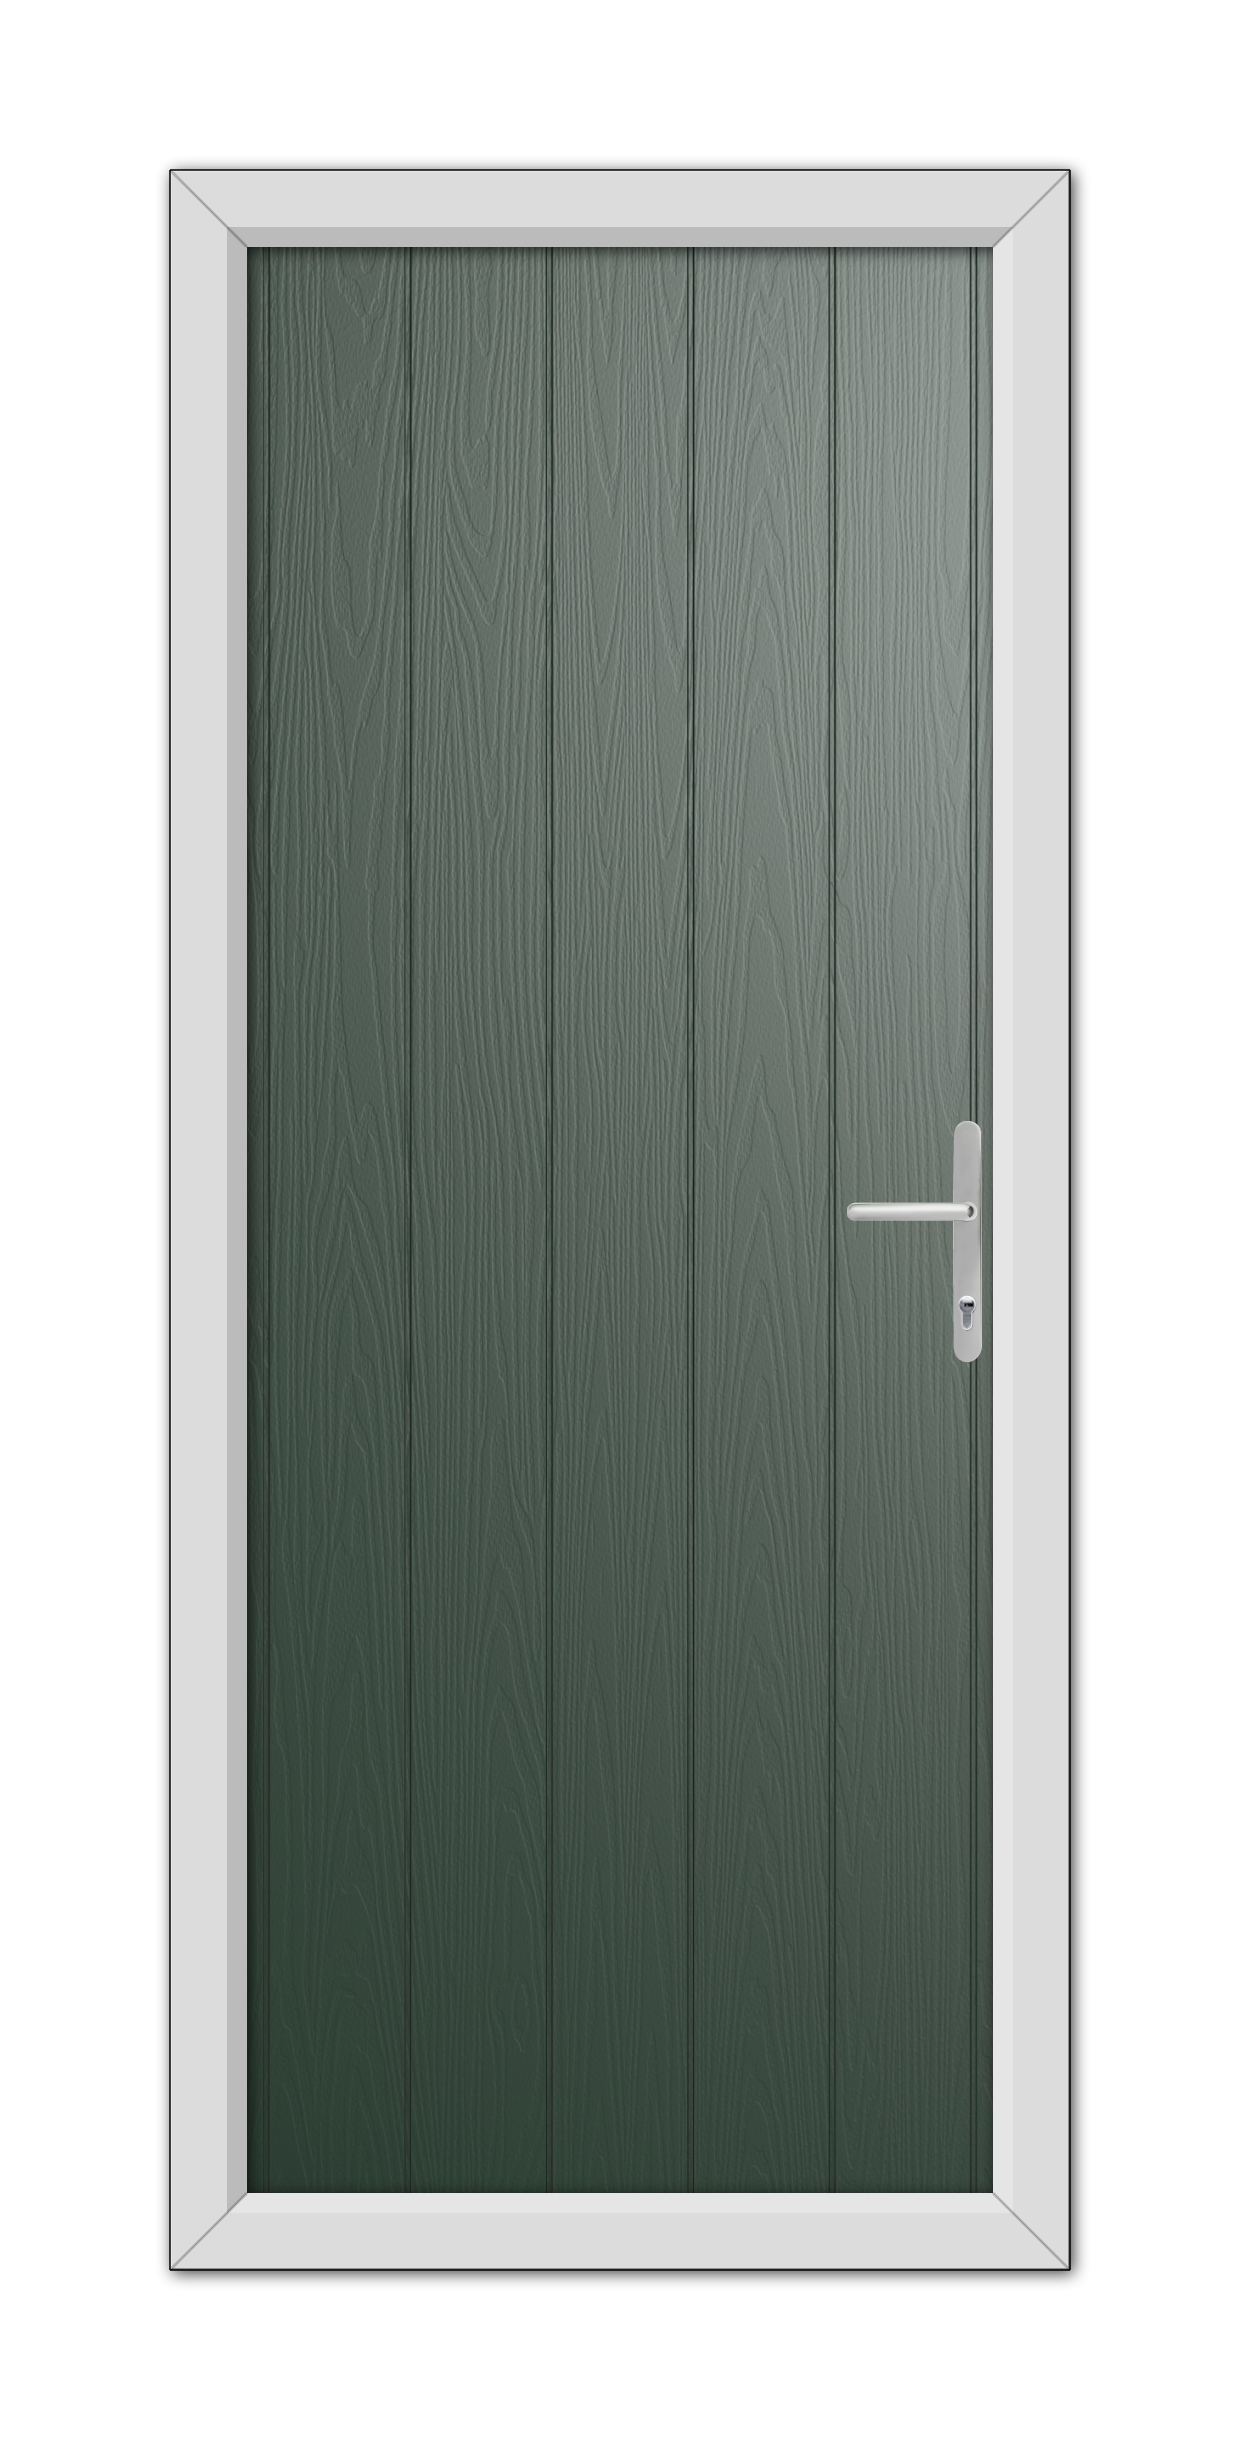 A closed Green Norfolk Solid Composite Door 48mm Timber Core with a vertical wood grain texture and a modern silver handle, framed by a white door frame.